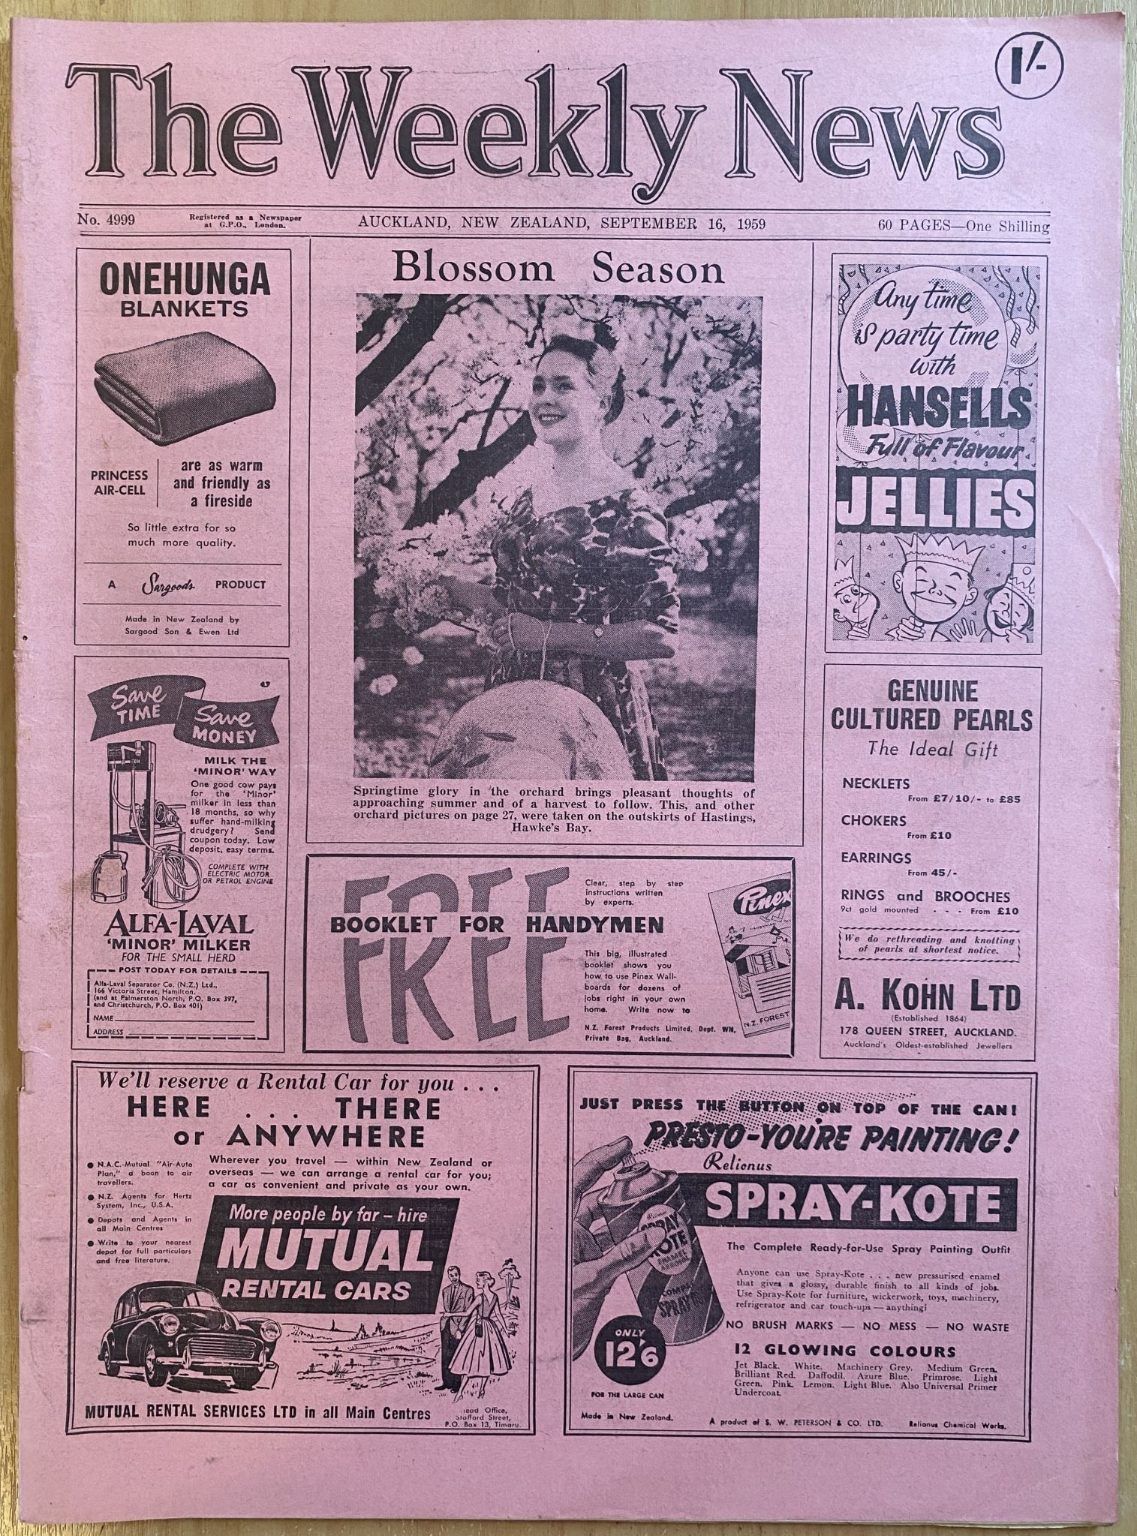 OLD NEWSPAPER: The Weekly News - No. 4999, 16 September 1959